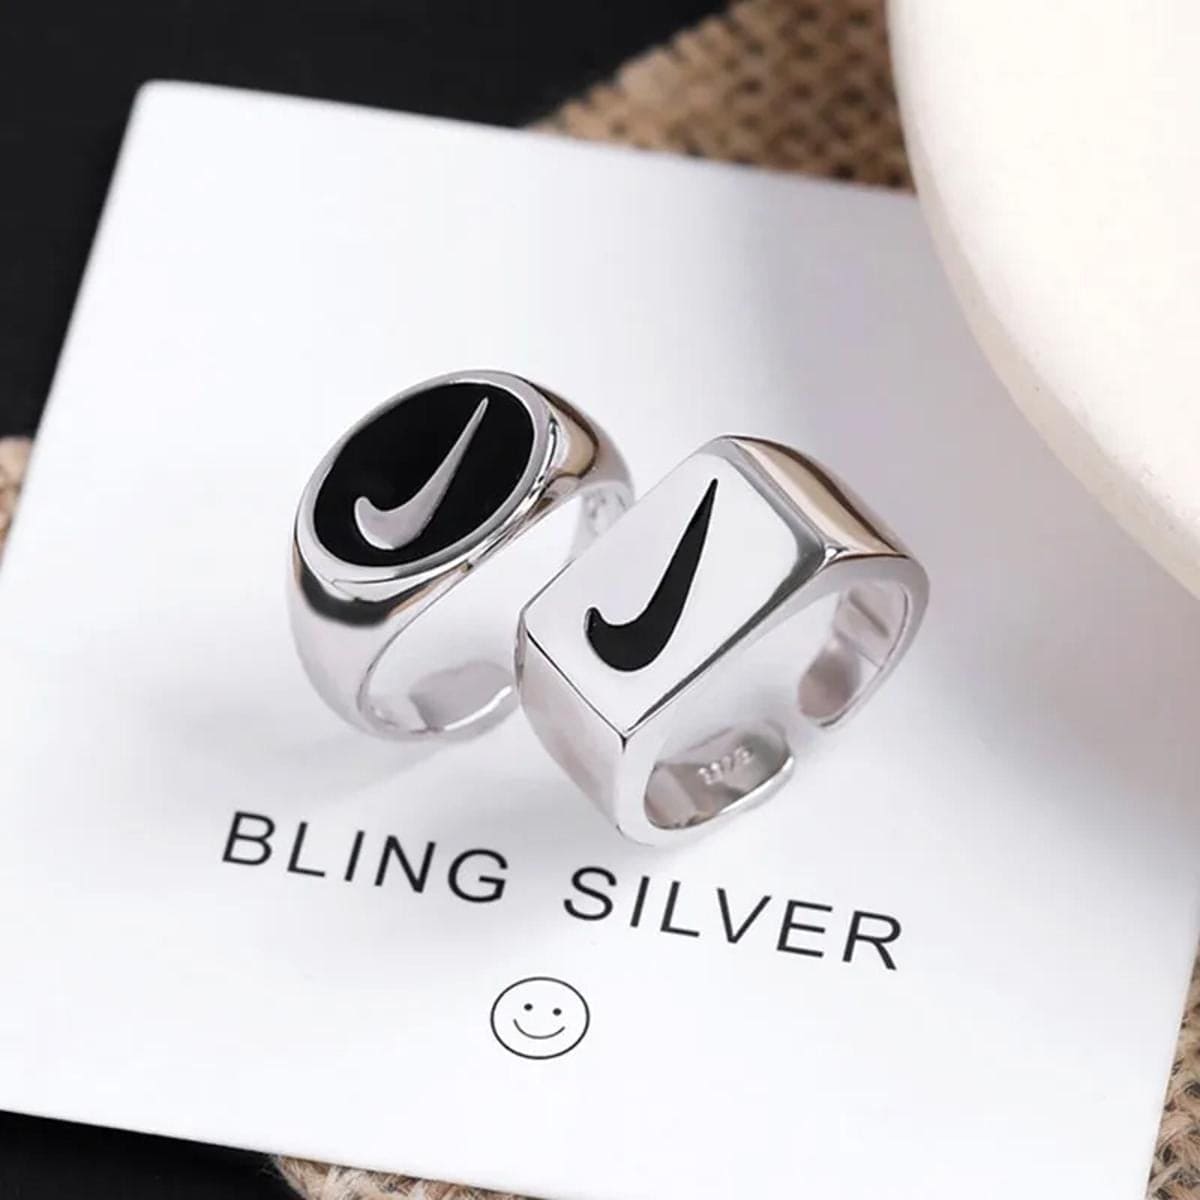 Set Of 2 Adjustable Combination Ring, Check Symbol Silver Ring, Stainless Steel Signet Finger Ring, Finger Enamel Asian Ring Jewelry For Men And Women